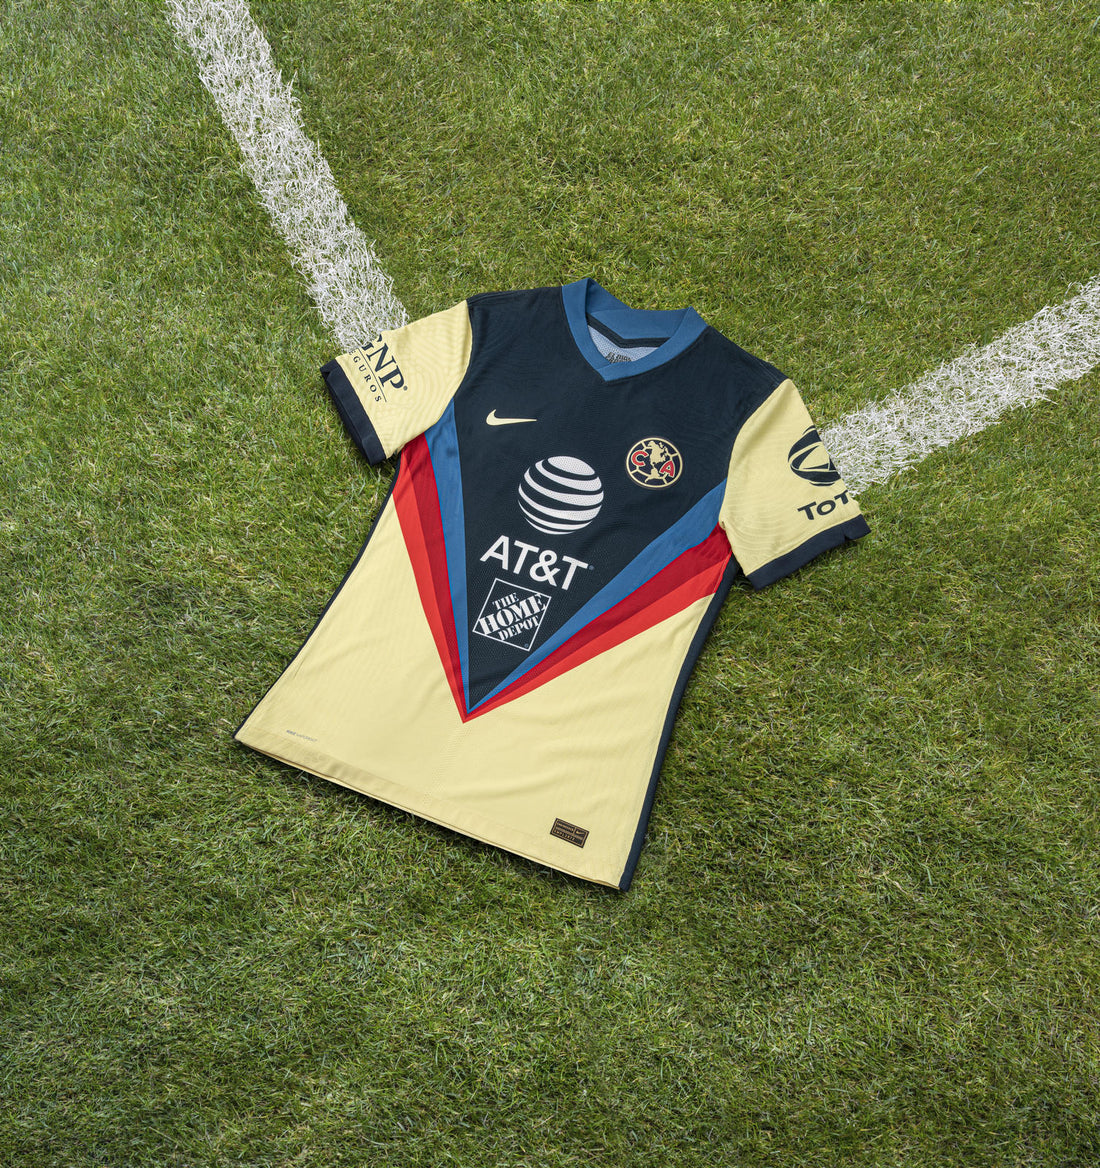 Club América’s Kit Pays Homage to ’80s Greatness